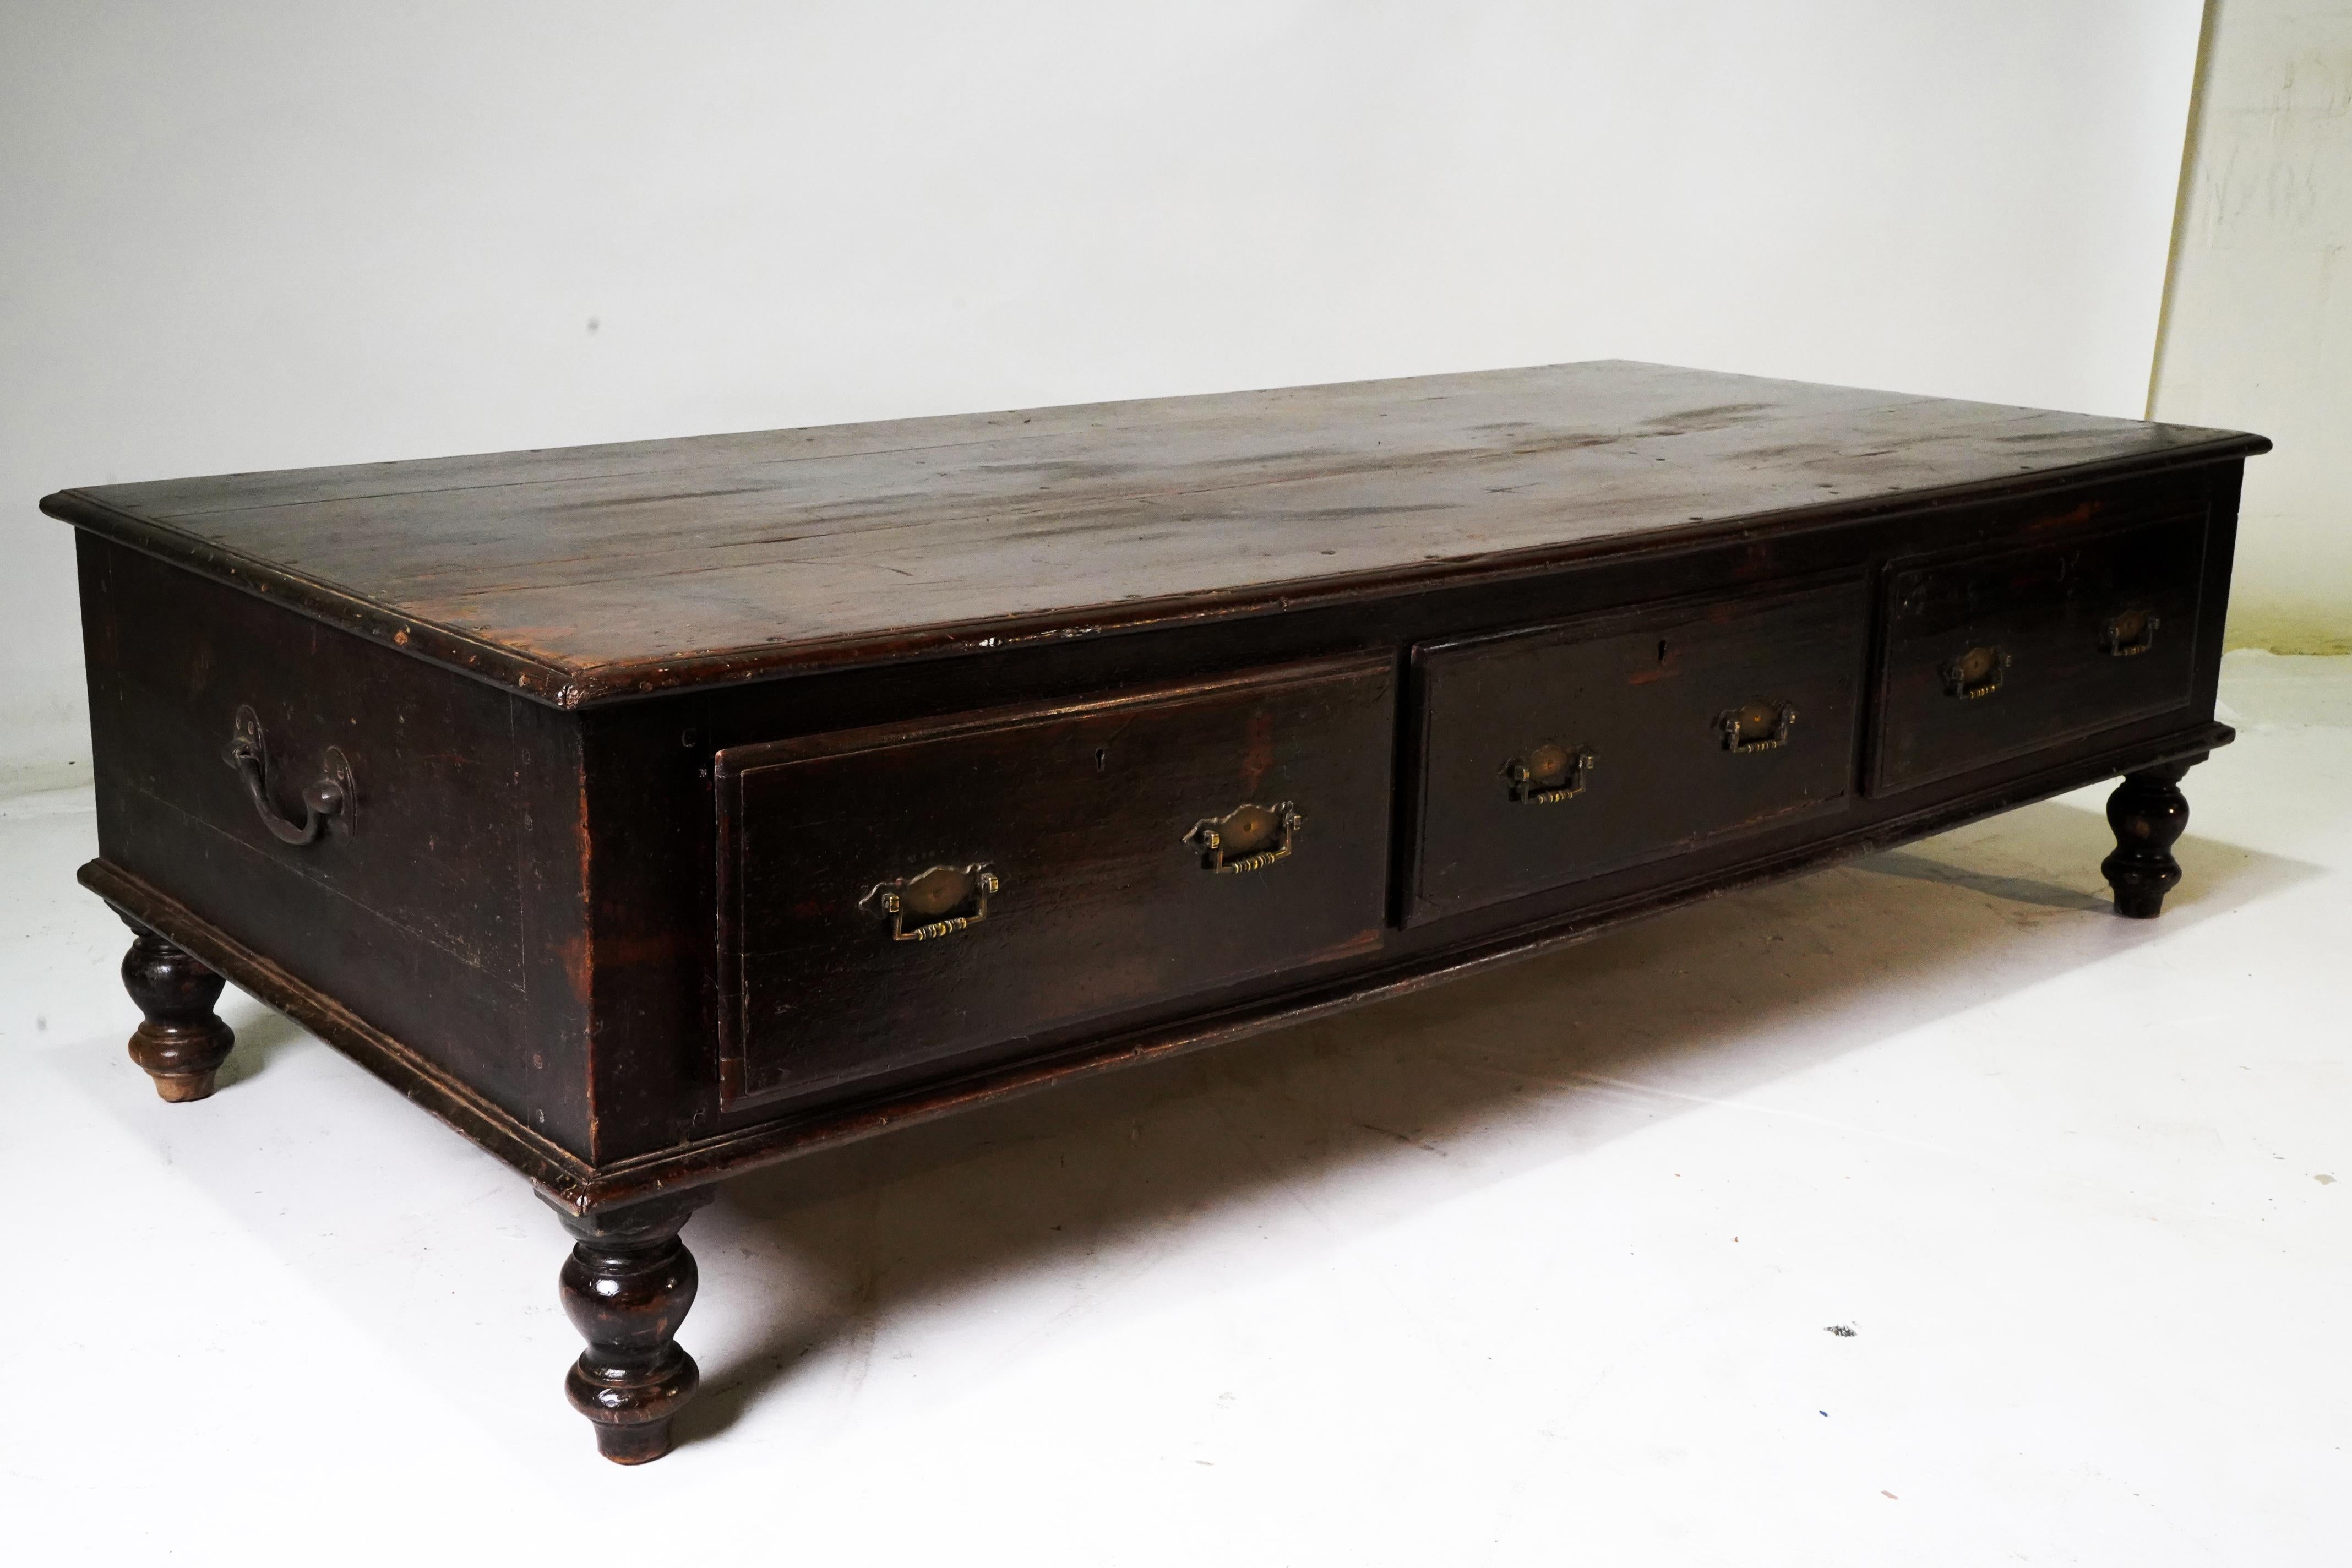 20th Century Indian Teakwood Daybed with Three Storage Drawers